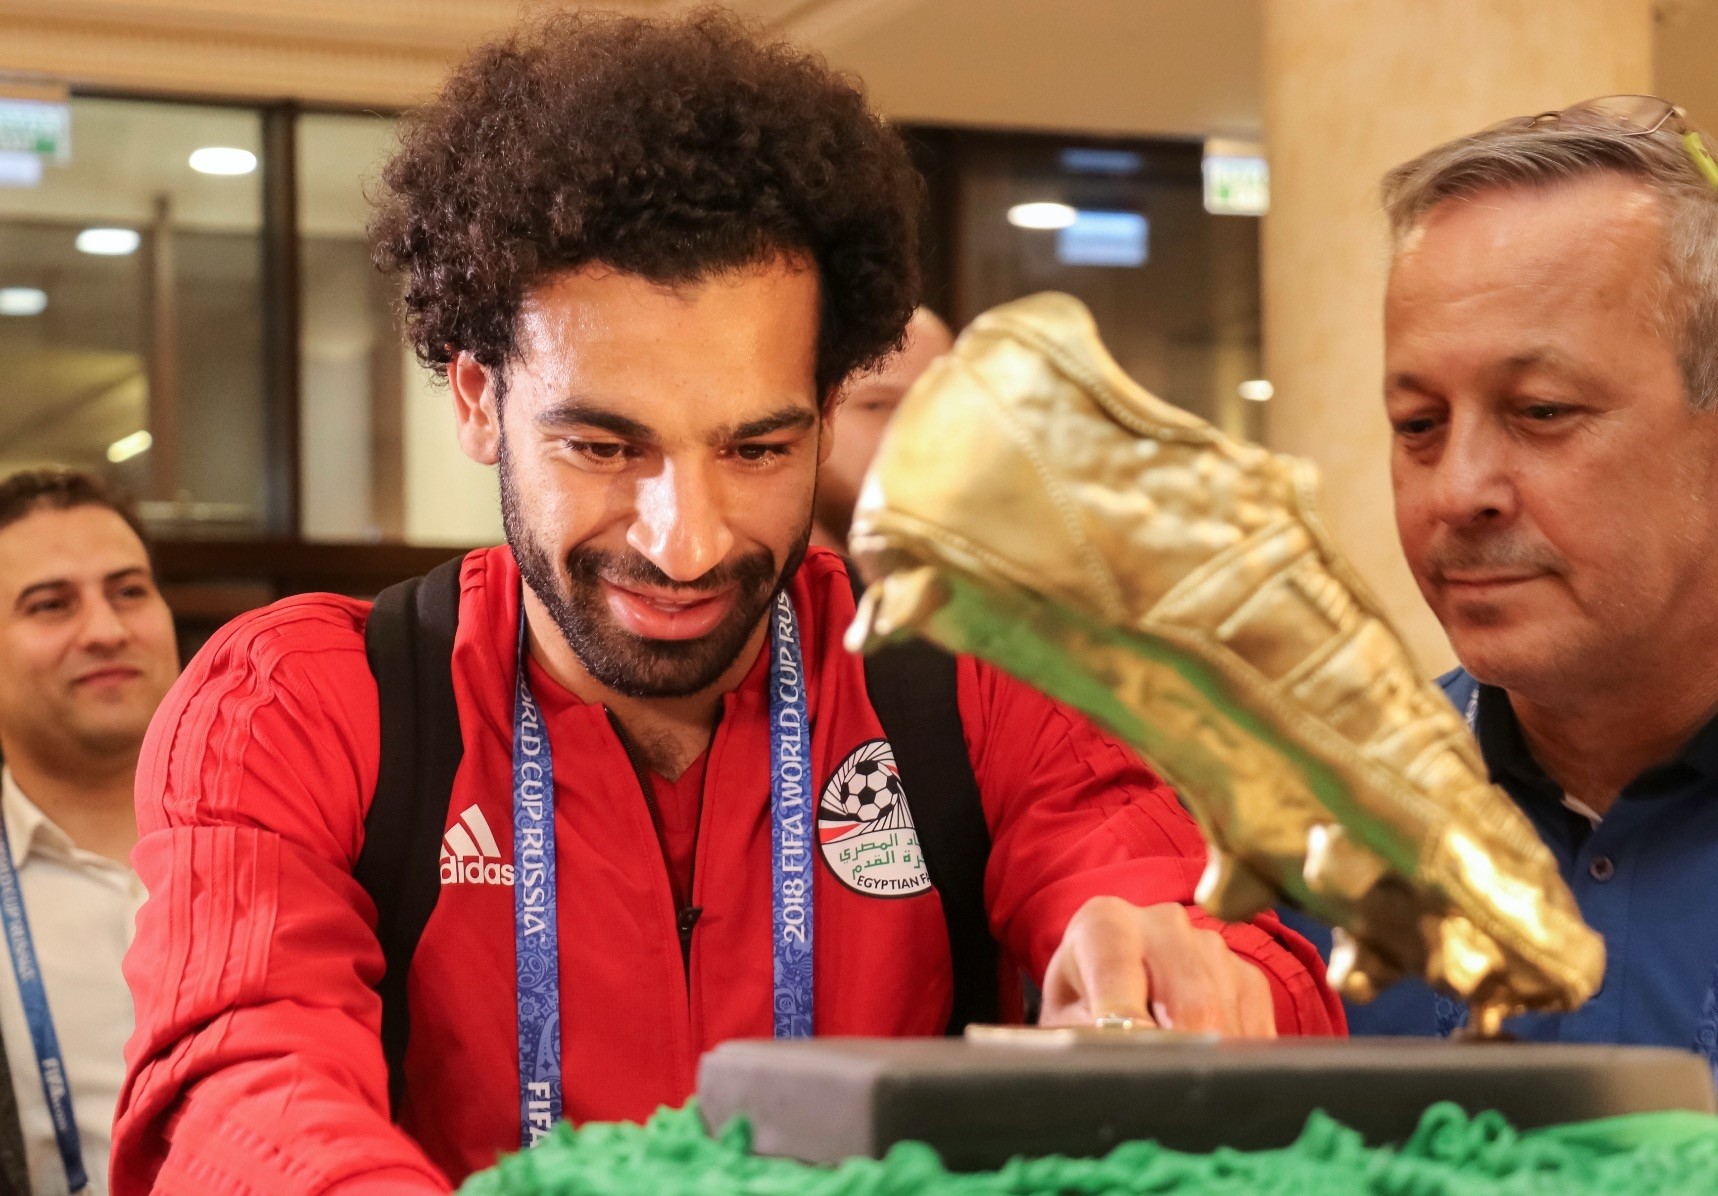 Egyptian national team player Mohamed Salah receives a cake, weighing 100 kilograms and decorated with a golden football boot, as a present on his birthday in the Chechen capital Grozny, June 16.